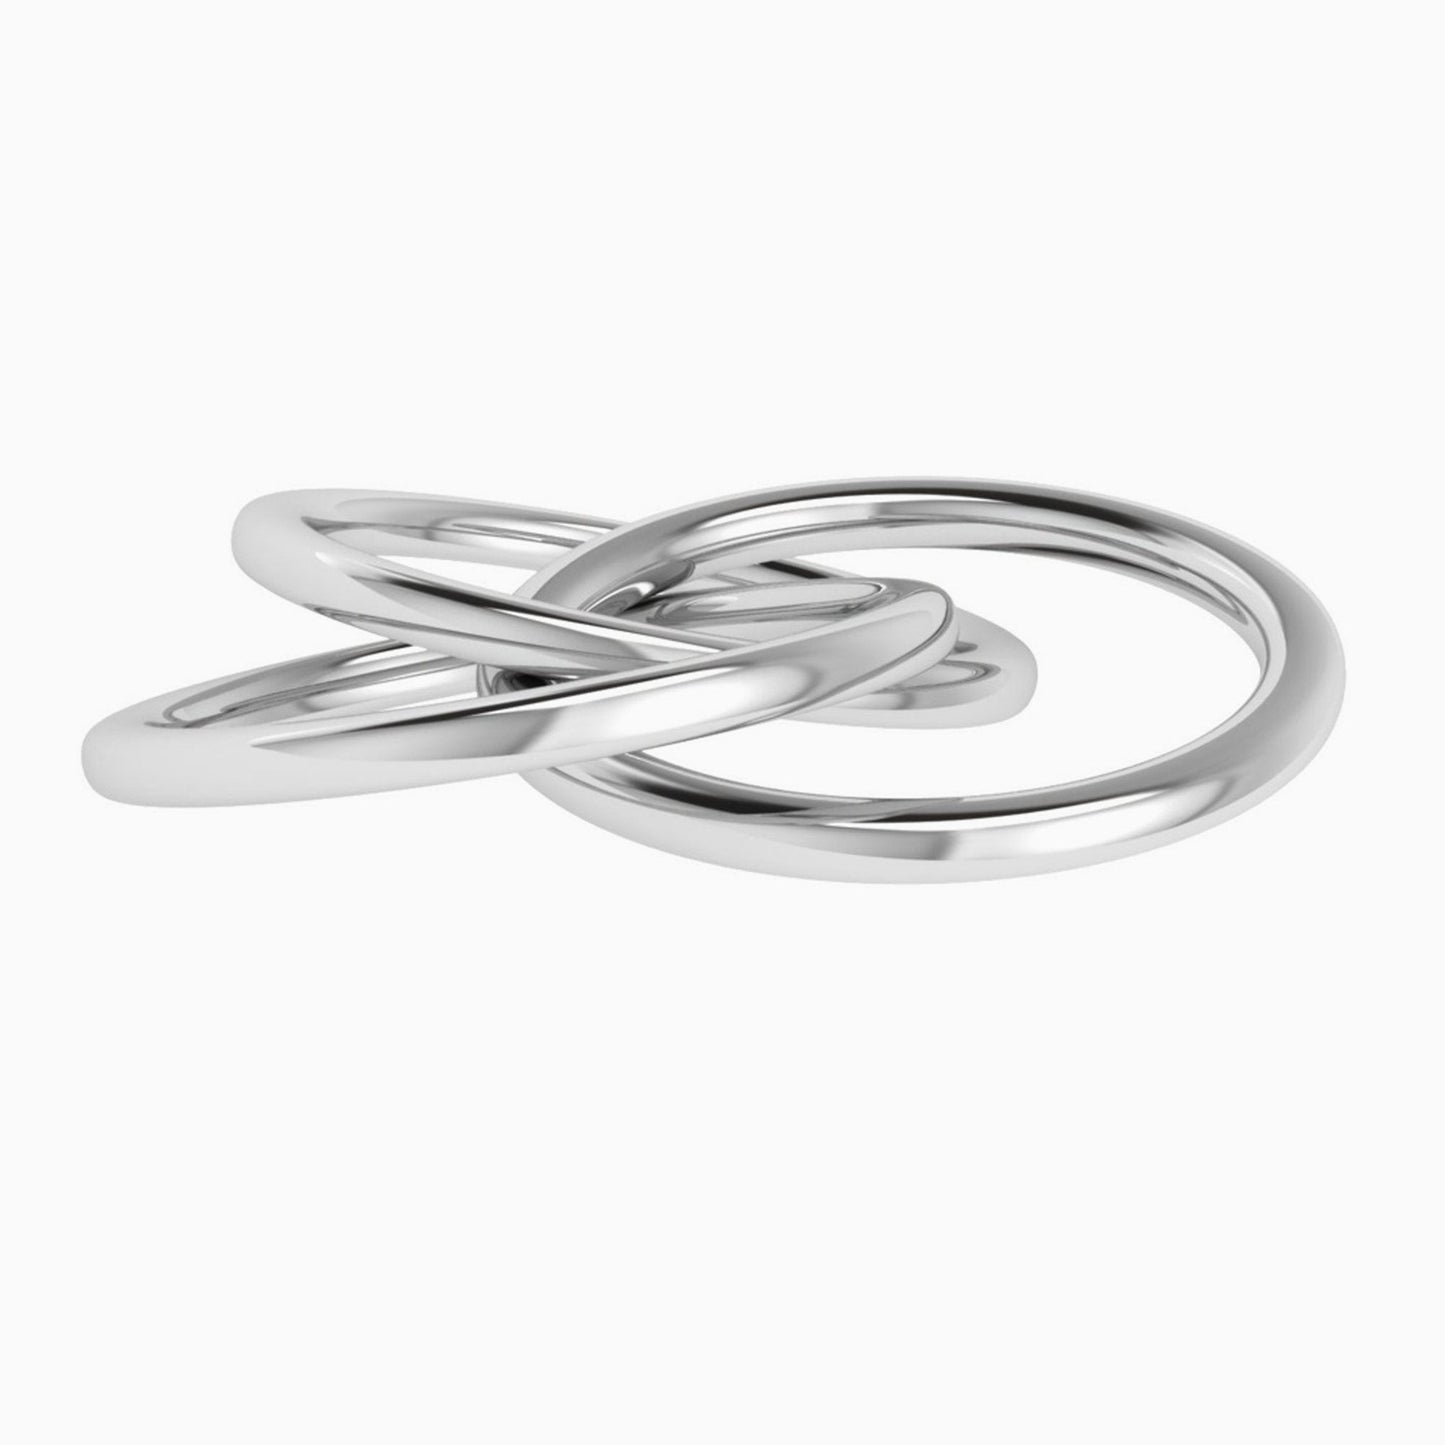 Silver Plated 3 Ring Baby Rattle by Krysaliis